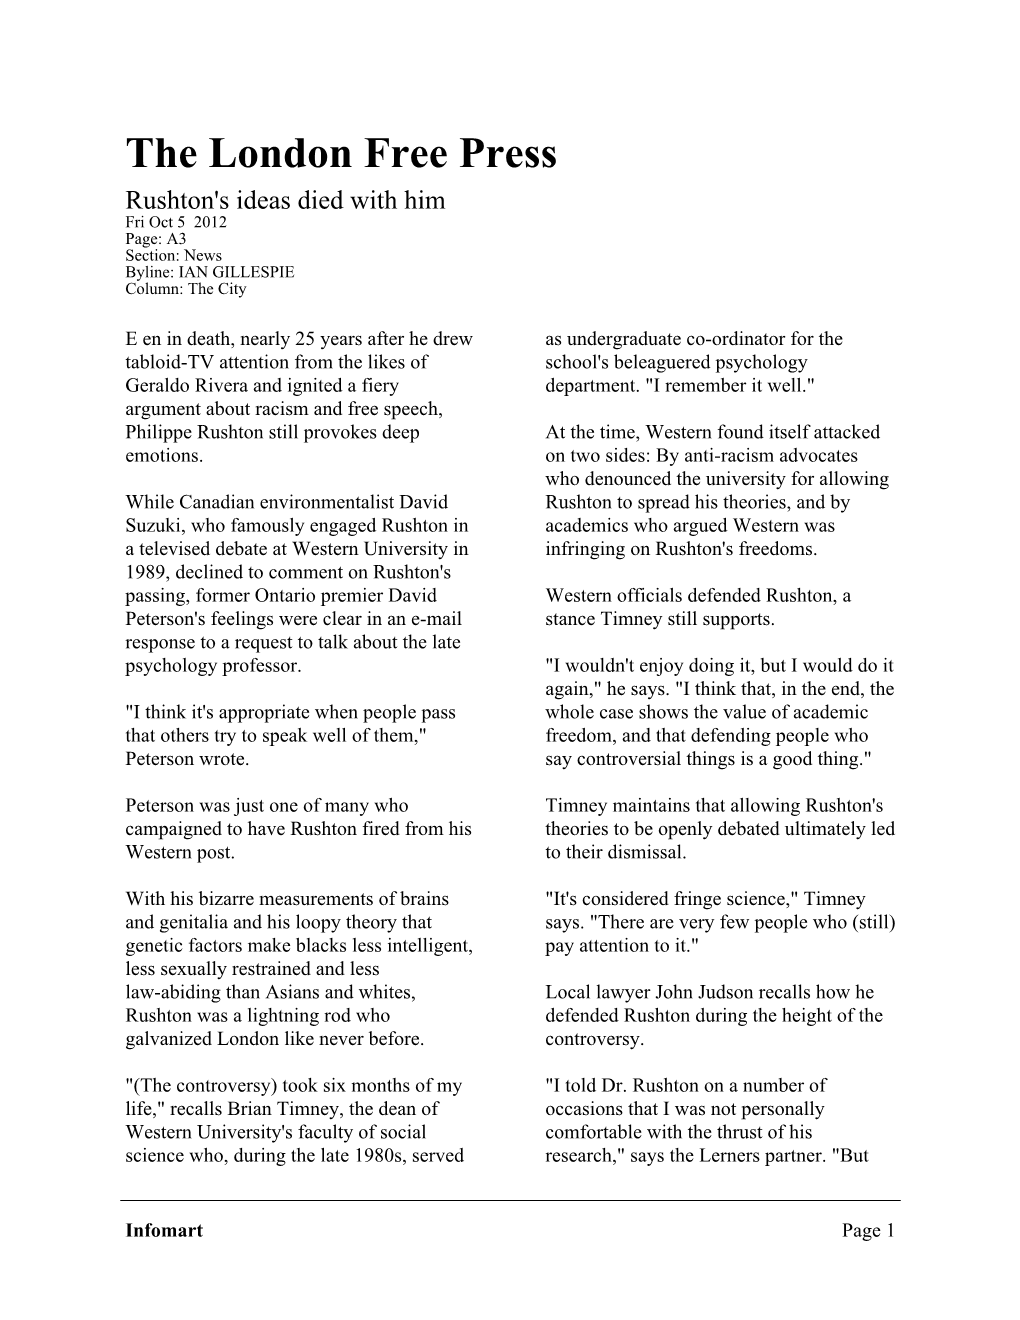 The London Free Press Rushton's Ideas Died with Him Fri Oct 5 2012 Page: A3 Section: News Byline: IAN GILLESPIE Column: the City